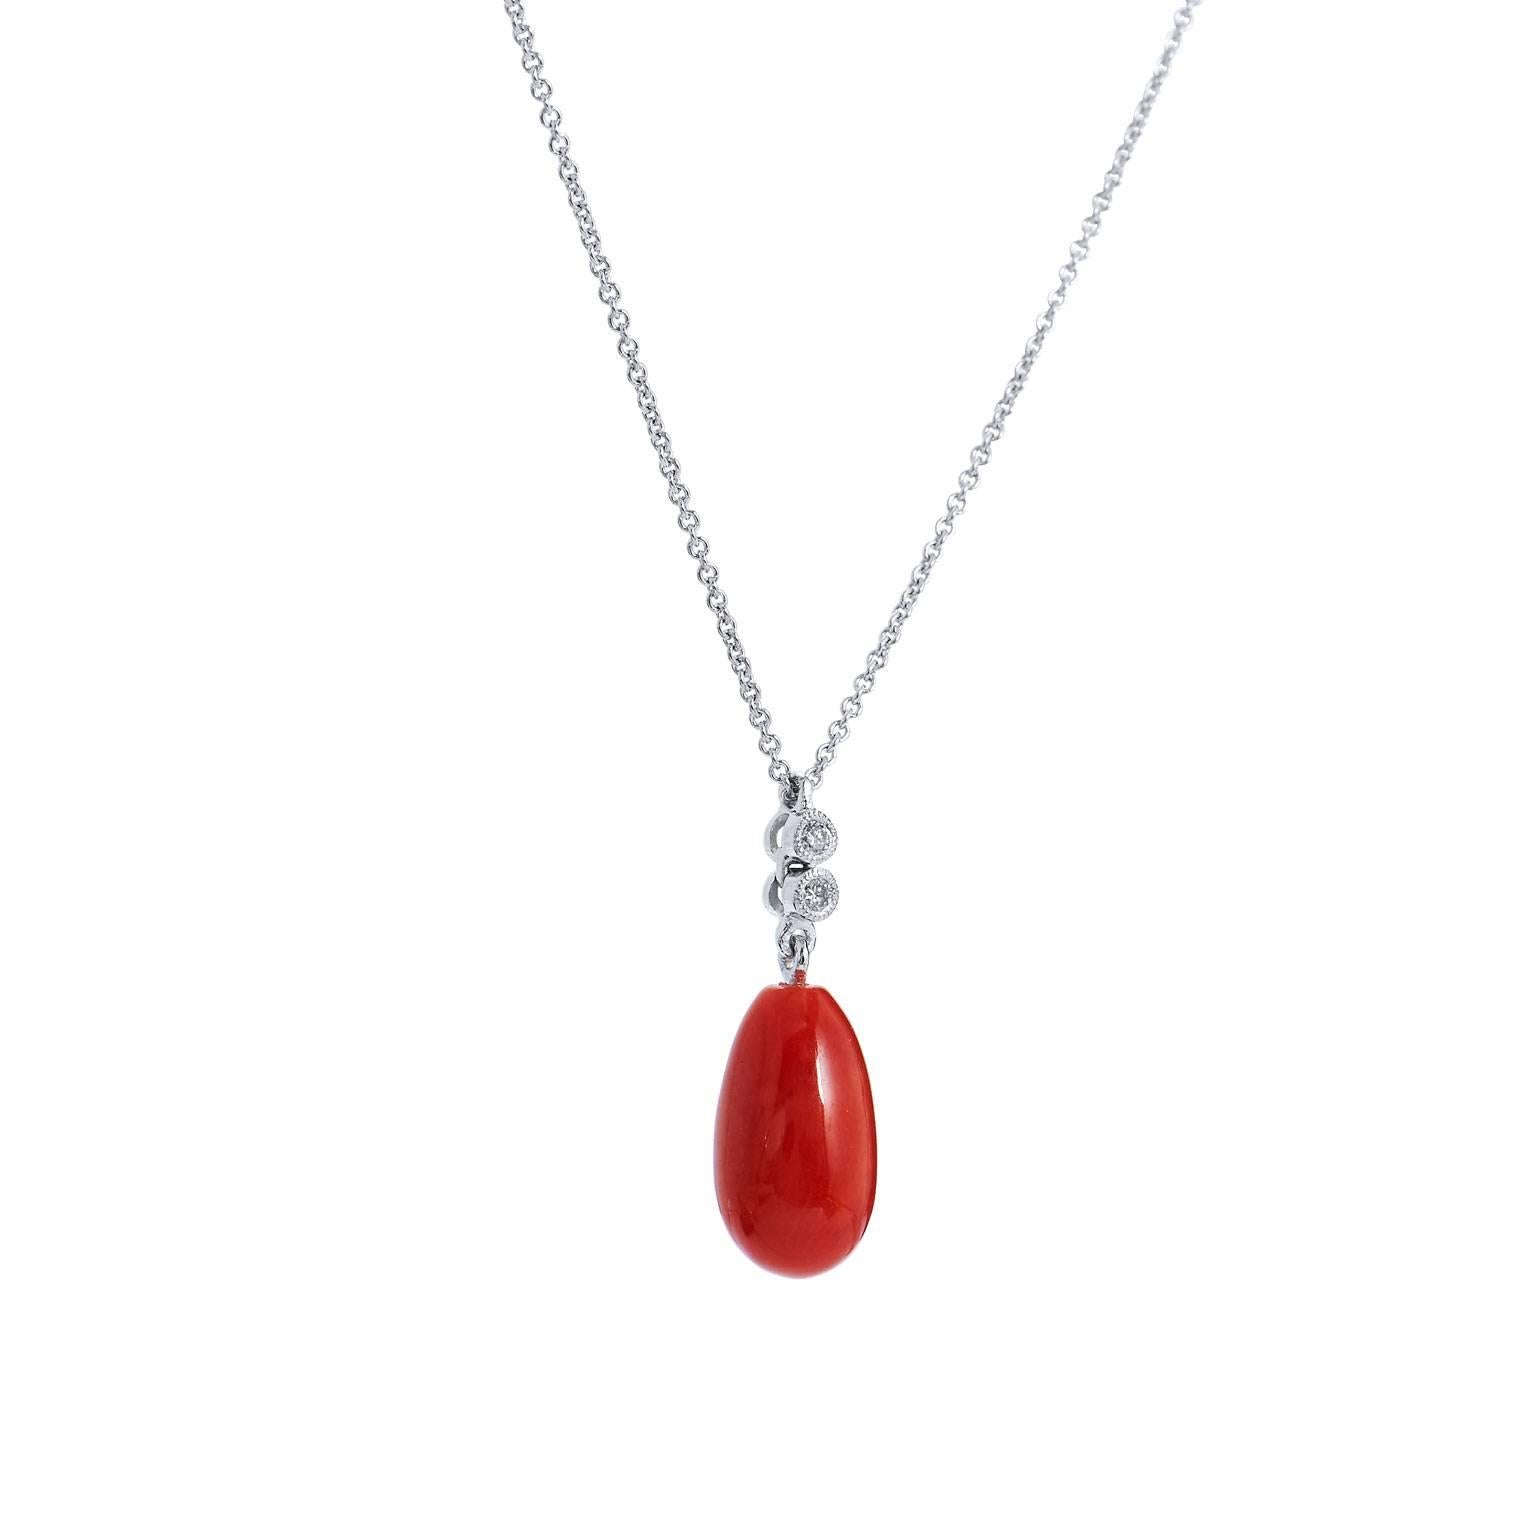 Like a teardrop falling from the sun, red coral burns with intensity in this handmade H and H drop pendant. Featuring 0.02 carat of bezel set diamond at the bail, this 18 karat white gold drop pendant is absolutely sublime.